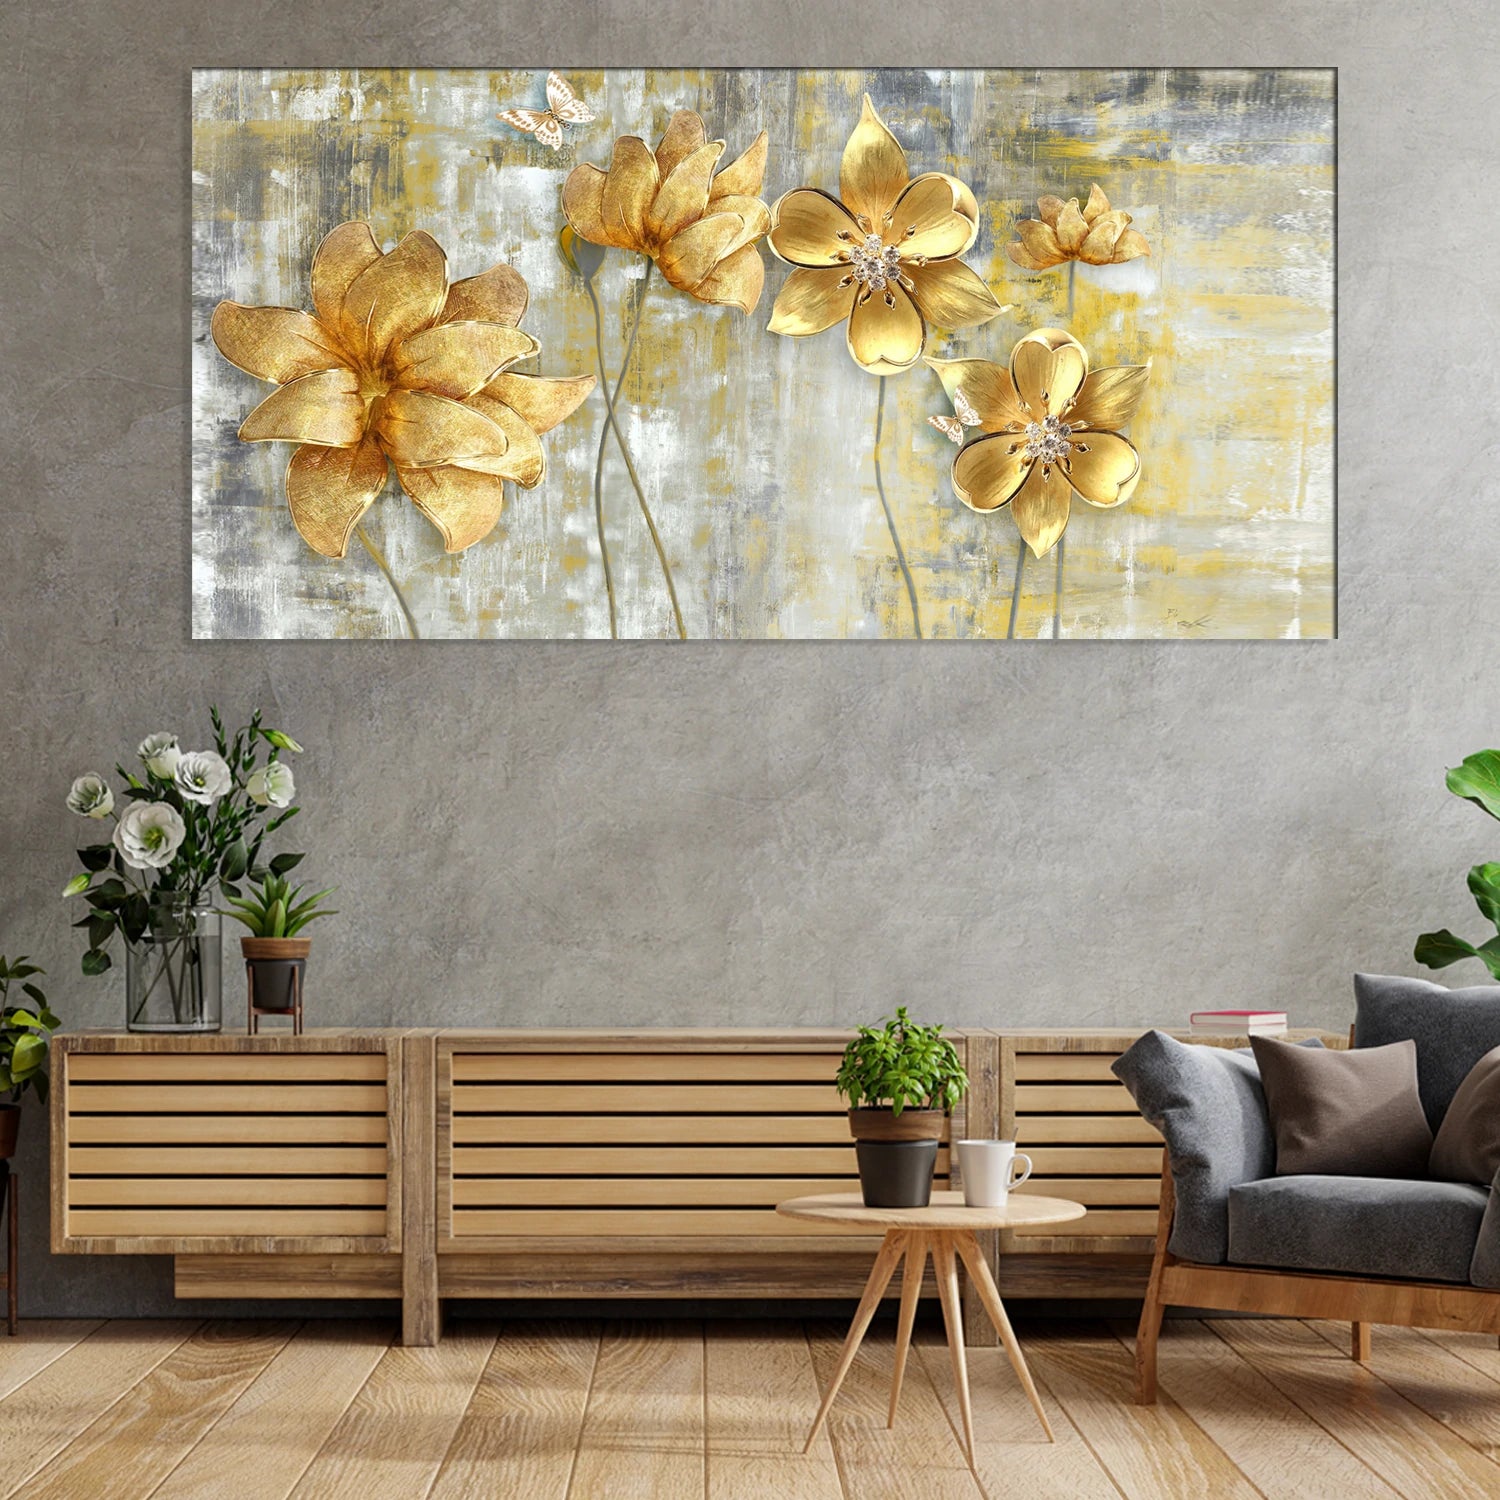 Golden Flower Canvas Print Wall Painting